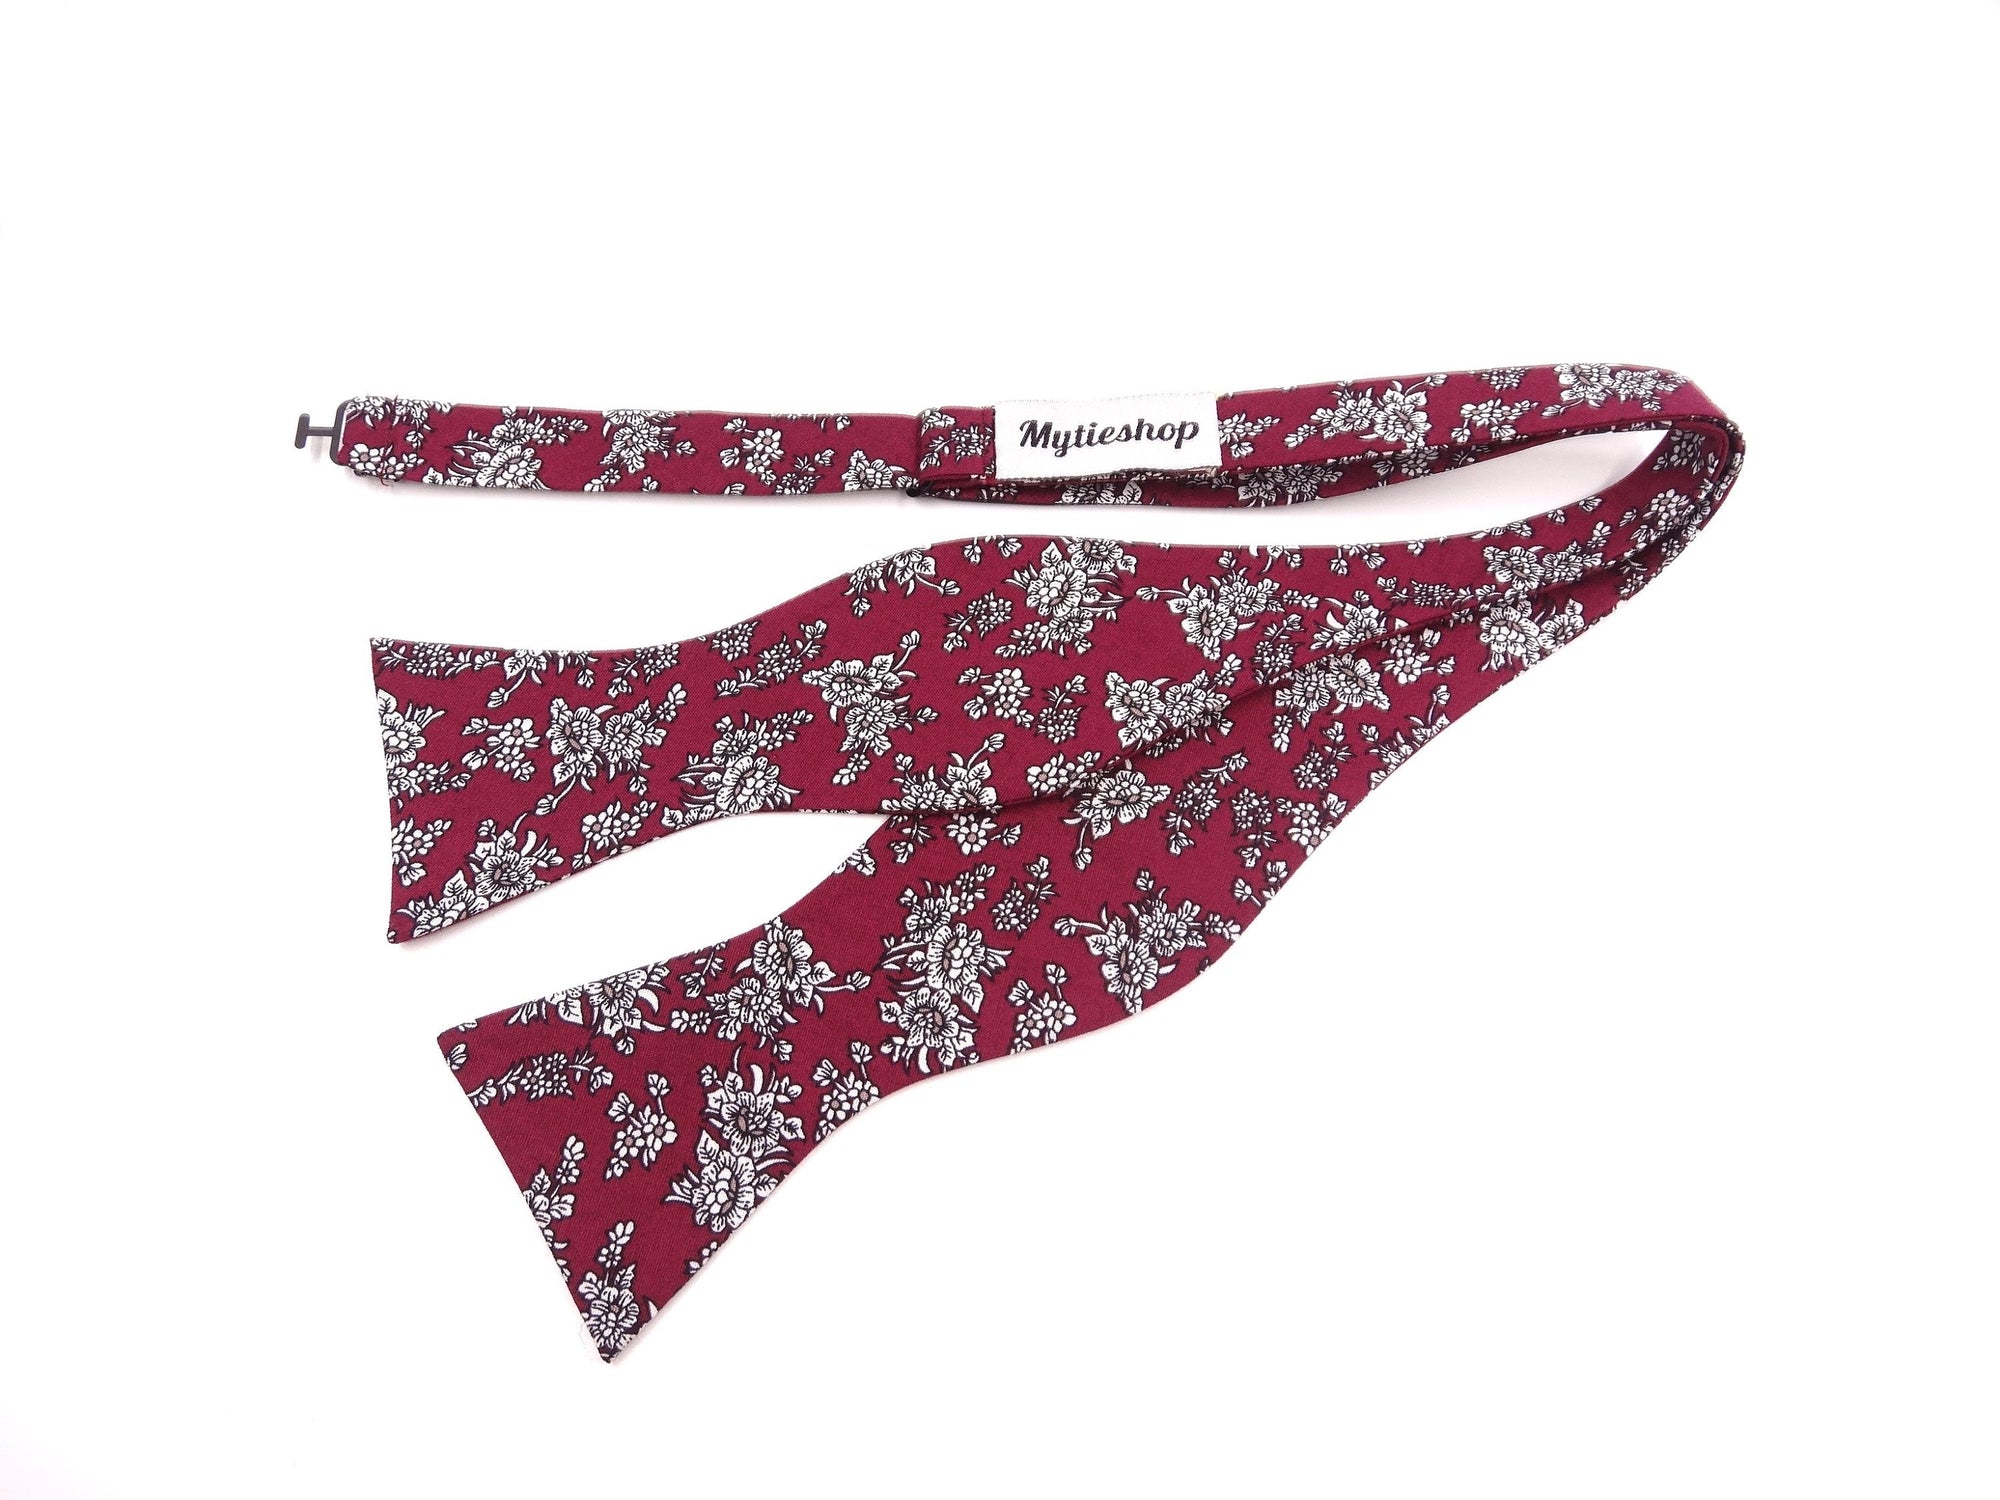 Maroon Floral Bow Tie Self Tie MYTIESHOP PRESTON-Maroon Floral Bow Tie Self Tie 100% Cotton Flannel Handmade Adjustable to fit most neck sizes 13 3/4" - 18" Color: Burgundy Great for Prom Dinners Interviews Photo shoots Photo sessions Dates Groom to stand out between his Groomsmen pair them up with neckties while he wears the bow tie. Floral self tie bow tie for weddings and events. Great anniversary present and gift. Also great gift for the groom and his groomsmen to wear at the wedding, and do